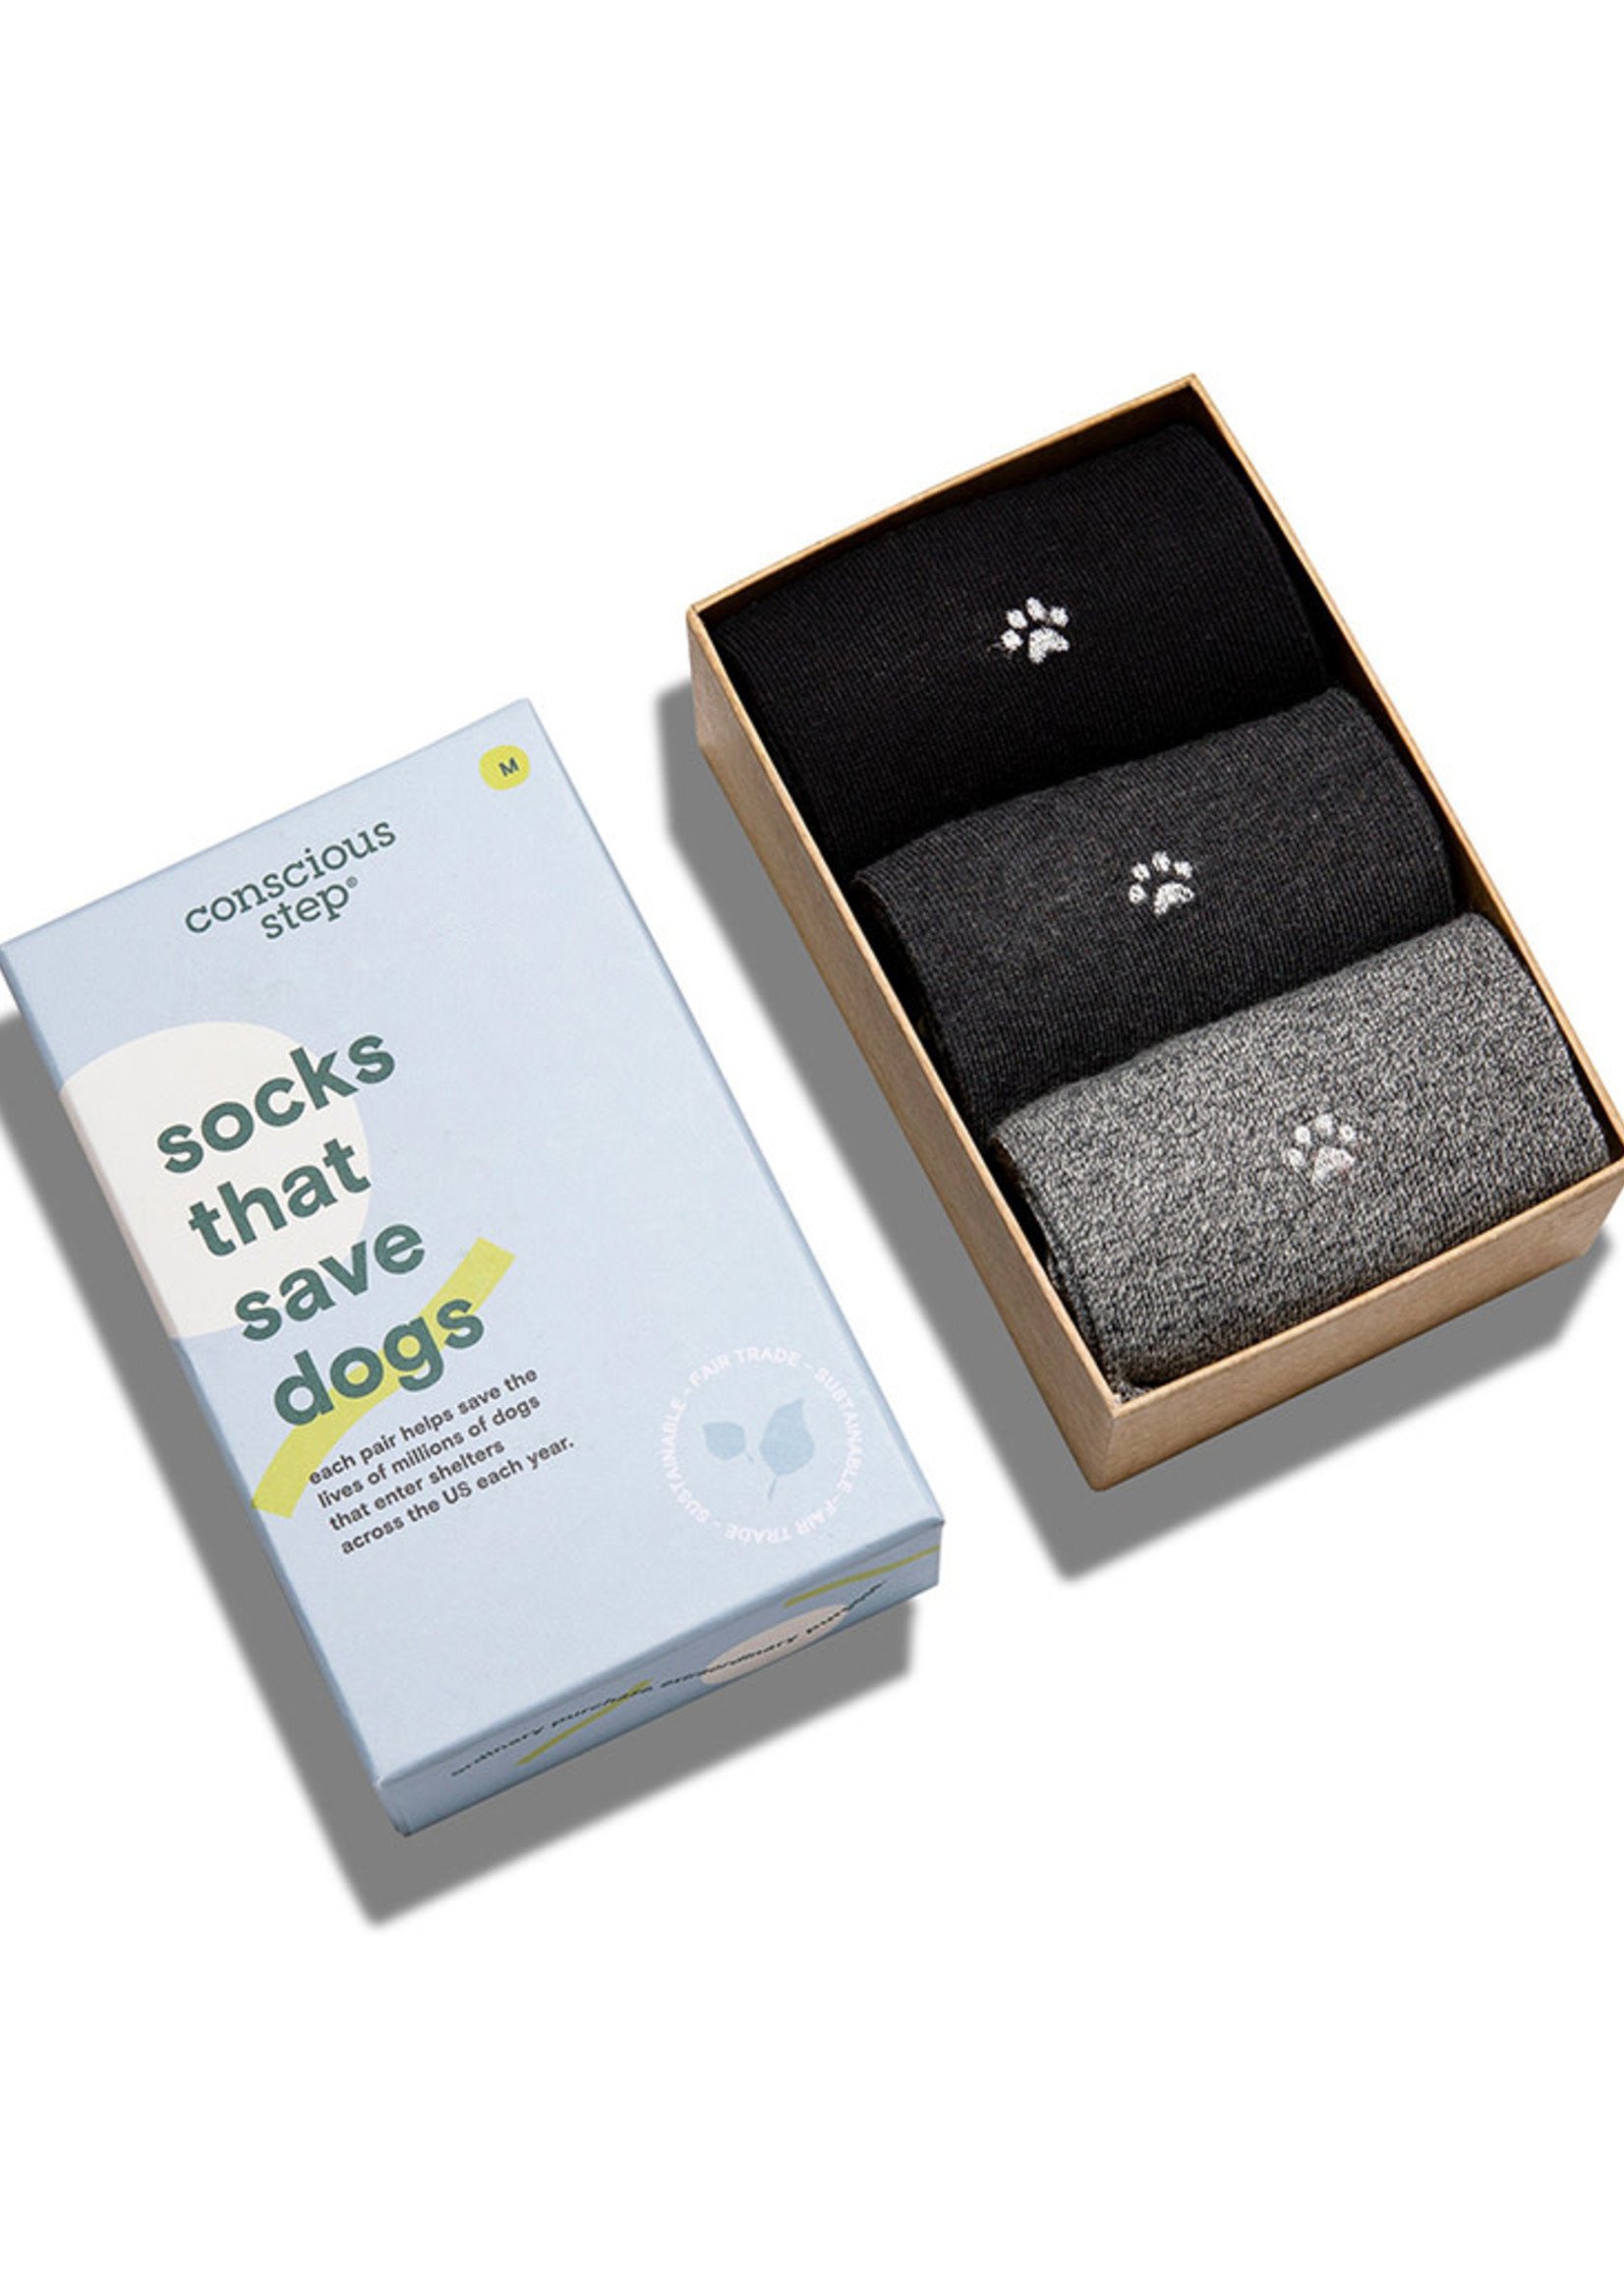 Conscious Step Men's Box of Socks That Save Dogs